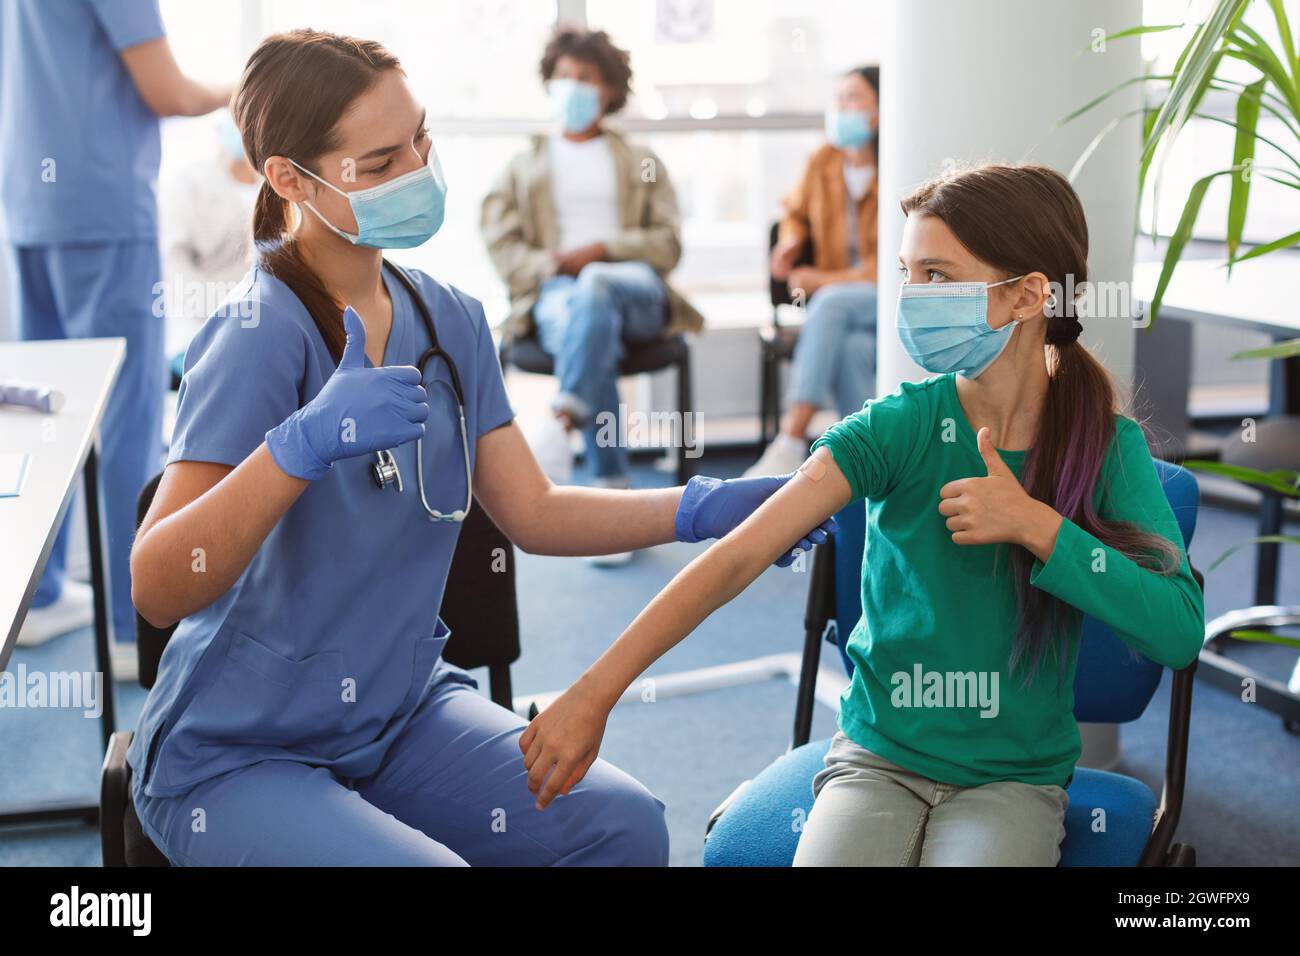 Portrait of adolescent patient in protective face mask showing thumbs up gesture after getting injection at hospital. Doctor applying adhesive bandage Stock Photo